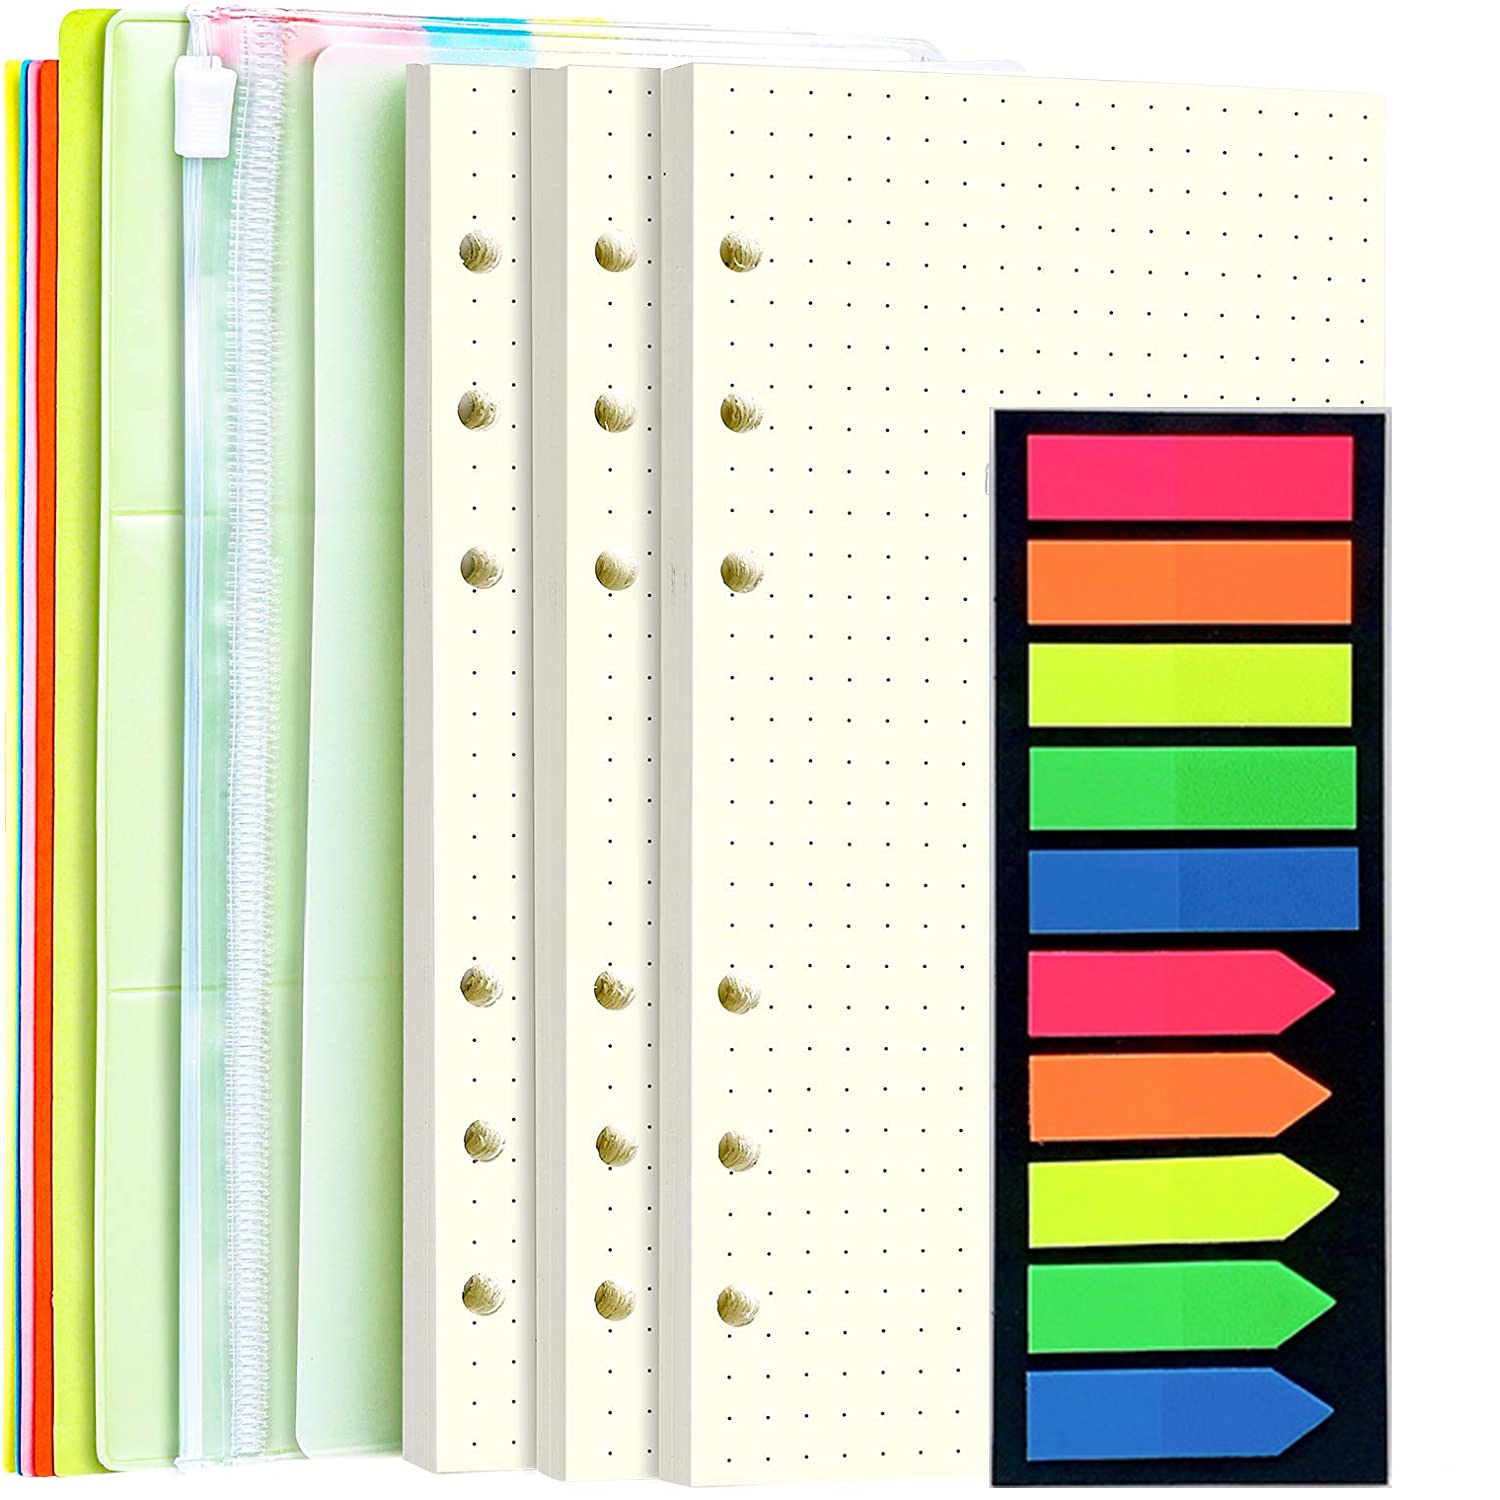 A6 Refill Paper, 100 Sheets Lined Paper, 6 Hole Punched - 5 Binder Dividers, 3 PVC Pouches, 160 Colored Index Tabs, 1 Quick Page Finder, for Filofax